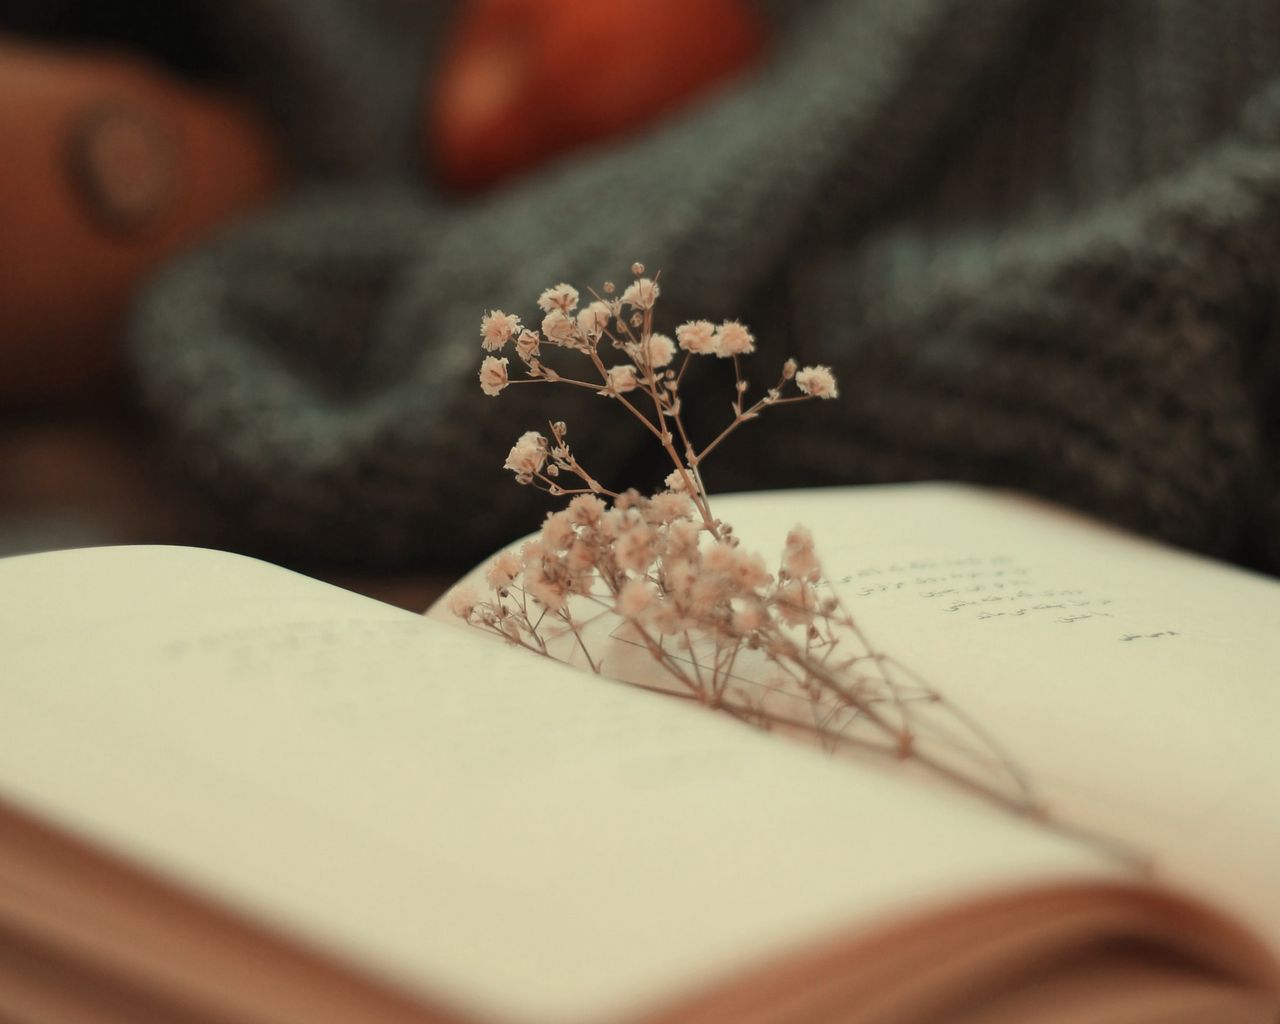 Download wallpaper 1280x1024 book, dried flowers, pages, flowers standard 5:4 HD background